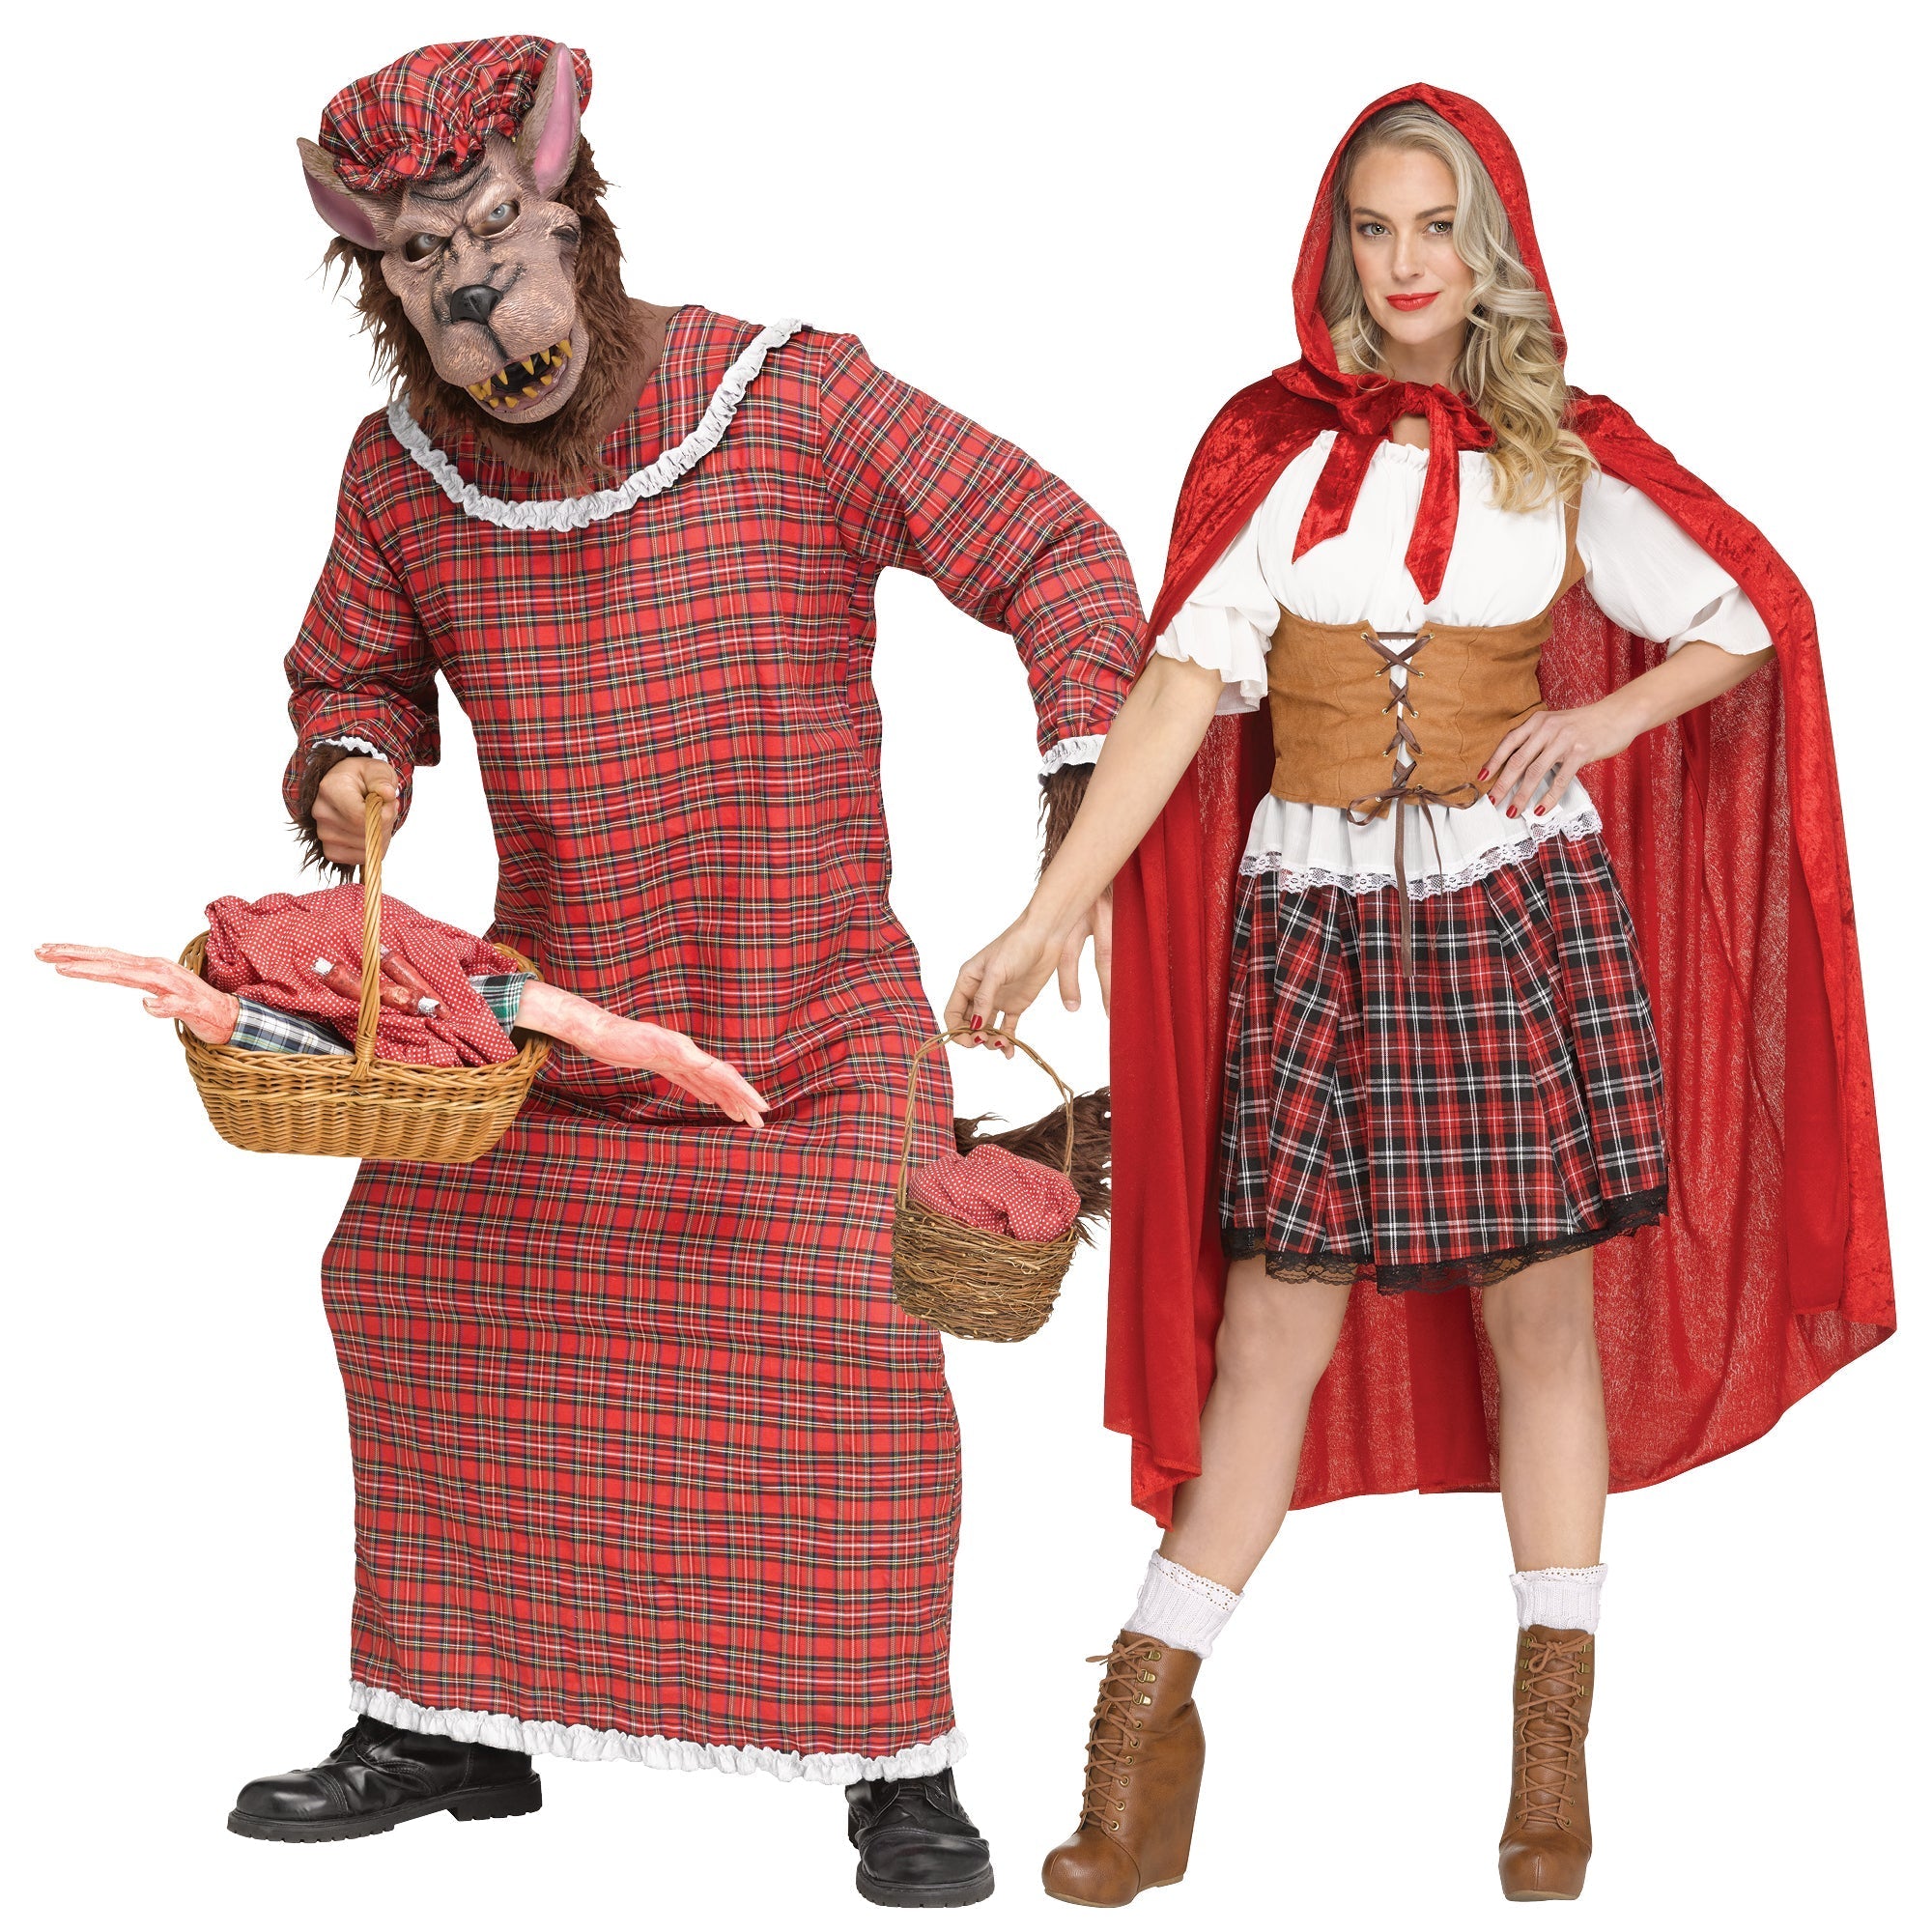 Red Riding Hood Couple Costumes